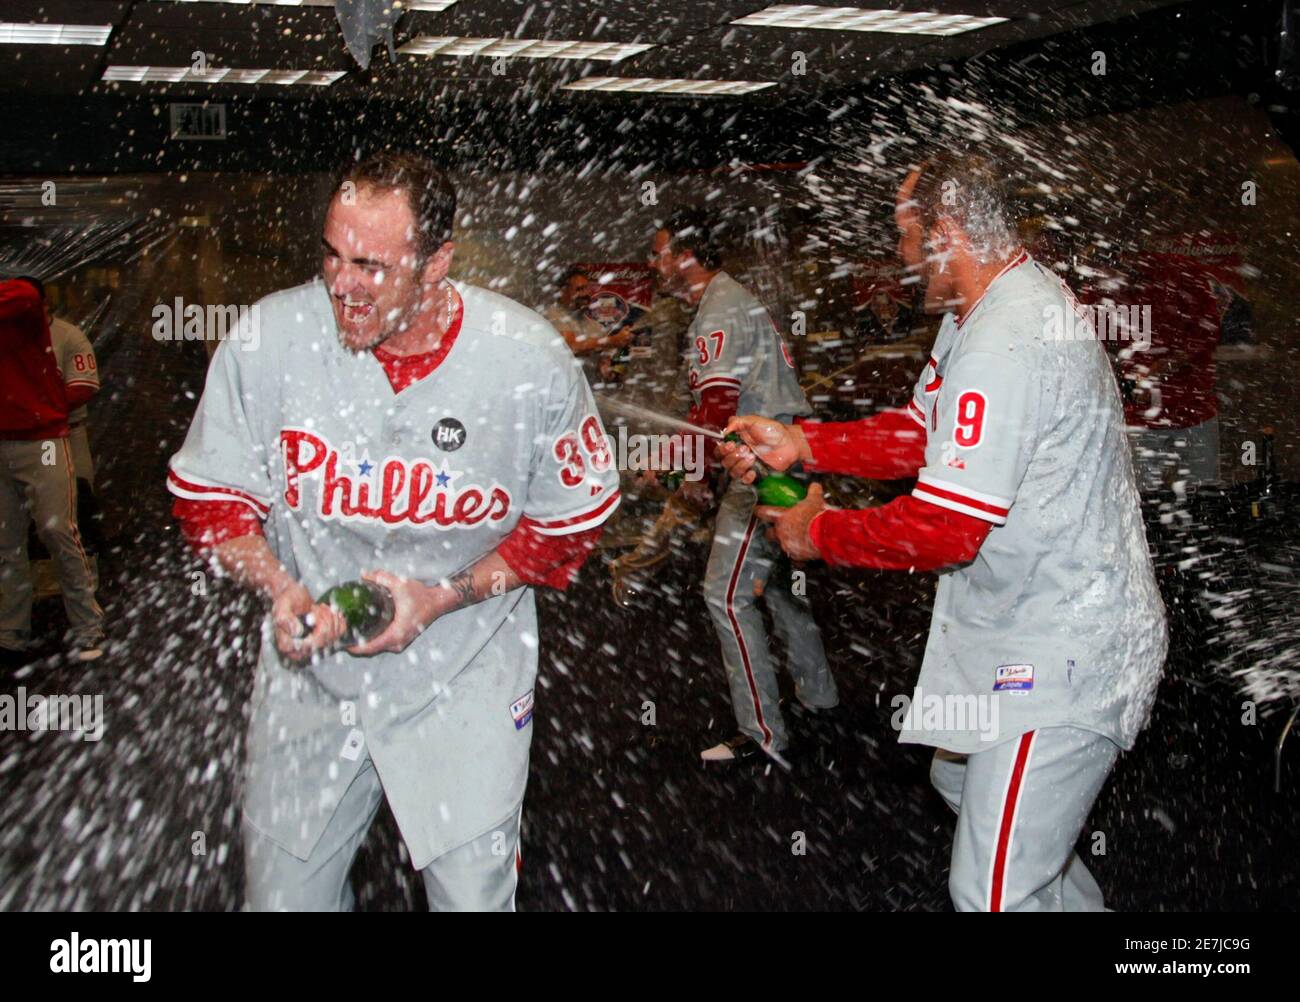 Philadelphia Phillies Brett Myers (L) and Miguel Cairo celebrate in the dressing room after the Phillies defeated the Colorado Rockies in their MLB National League Division Series playoff baseball game in Denver, October 12, 2009.     REUTERS/Rick Wilking (UNITED STATES SPORT BASEBALL IMAGES OF THE DAY) Stock Photo